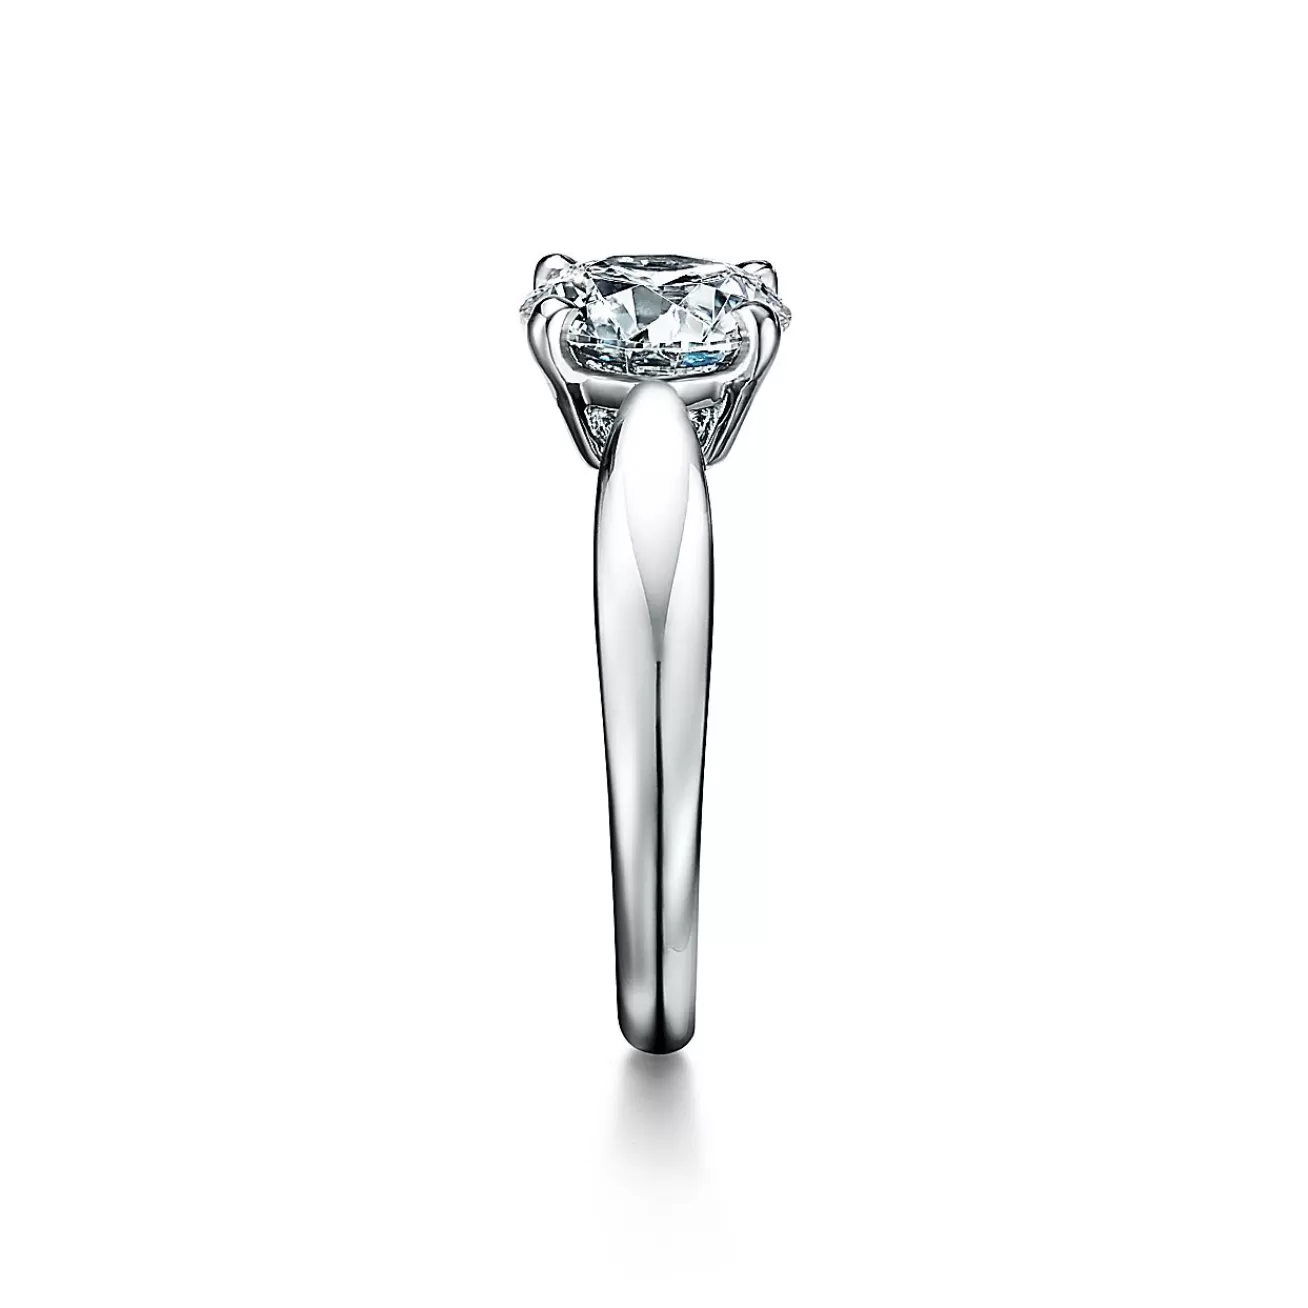 Tiffany & Co. Tiffany Harmony® engagement ring in platinum: a study in balance and grace. | ^ Engagement Rings